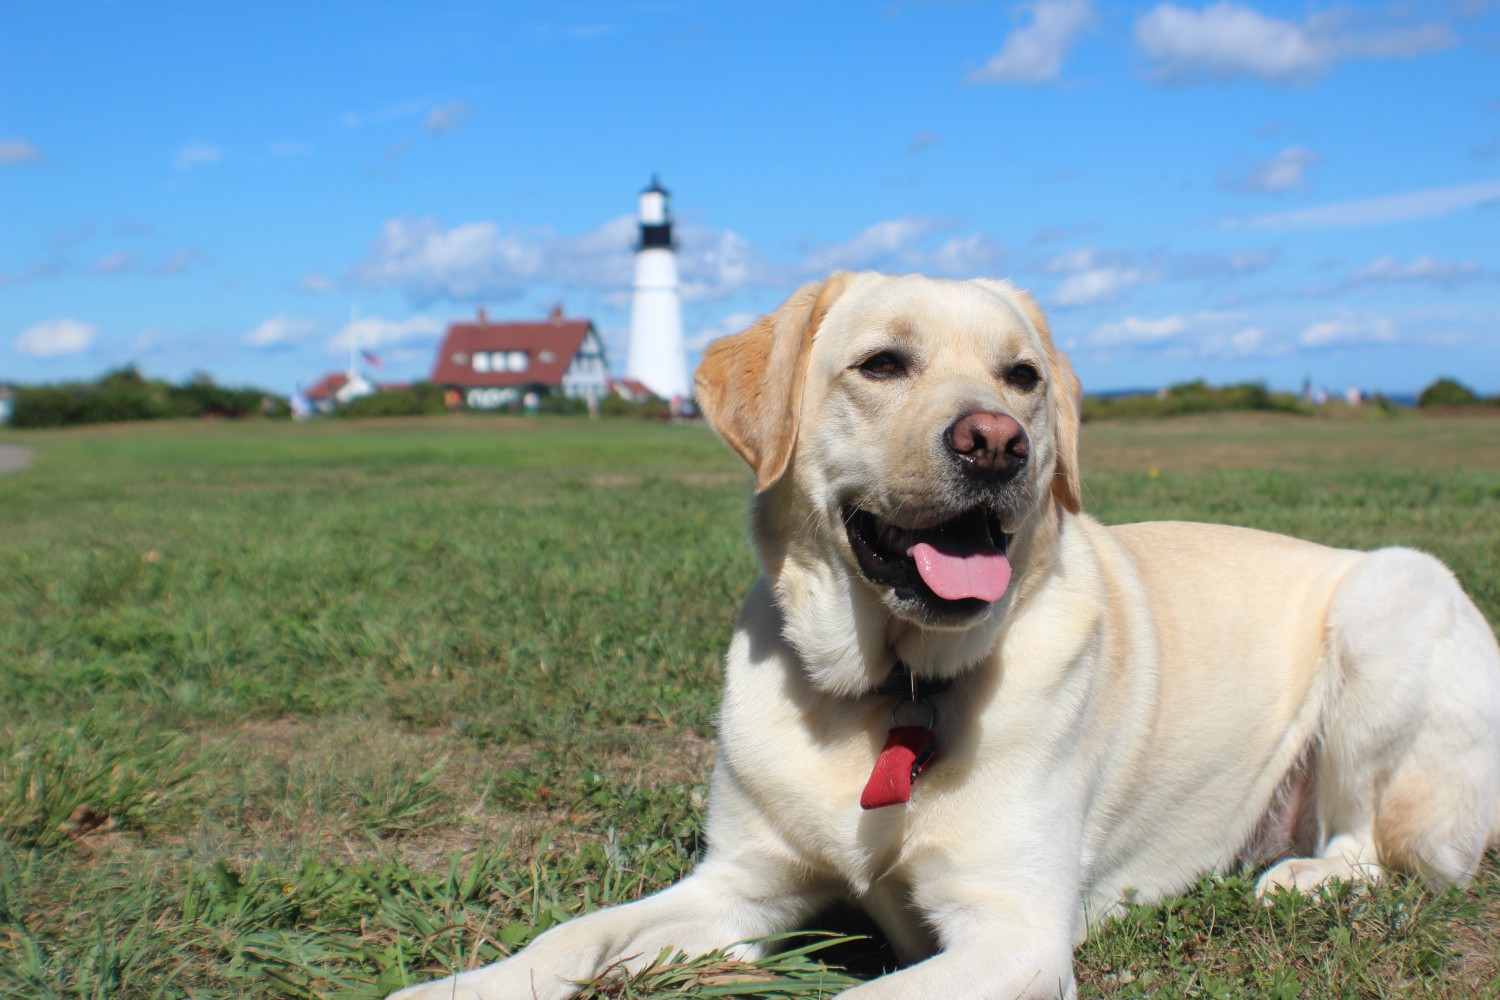 Veterinary and Rehabilitation Center of Cape Elizabeth - AAHA, american animal hospital association accredited,  Barnacle at Portland Headlight, serving the Cape Elizabeth and South Portland Communities, all pets welcome!